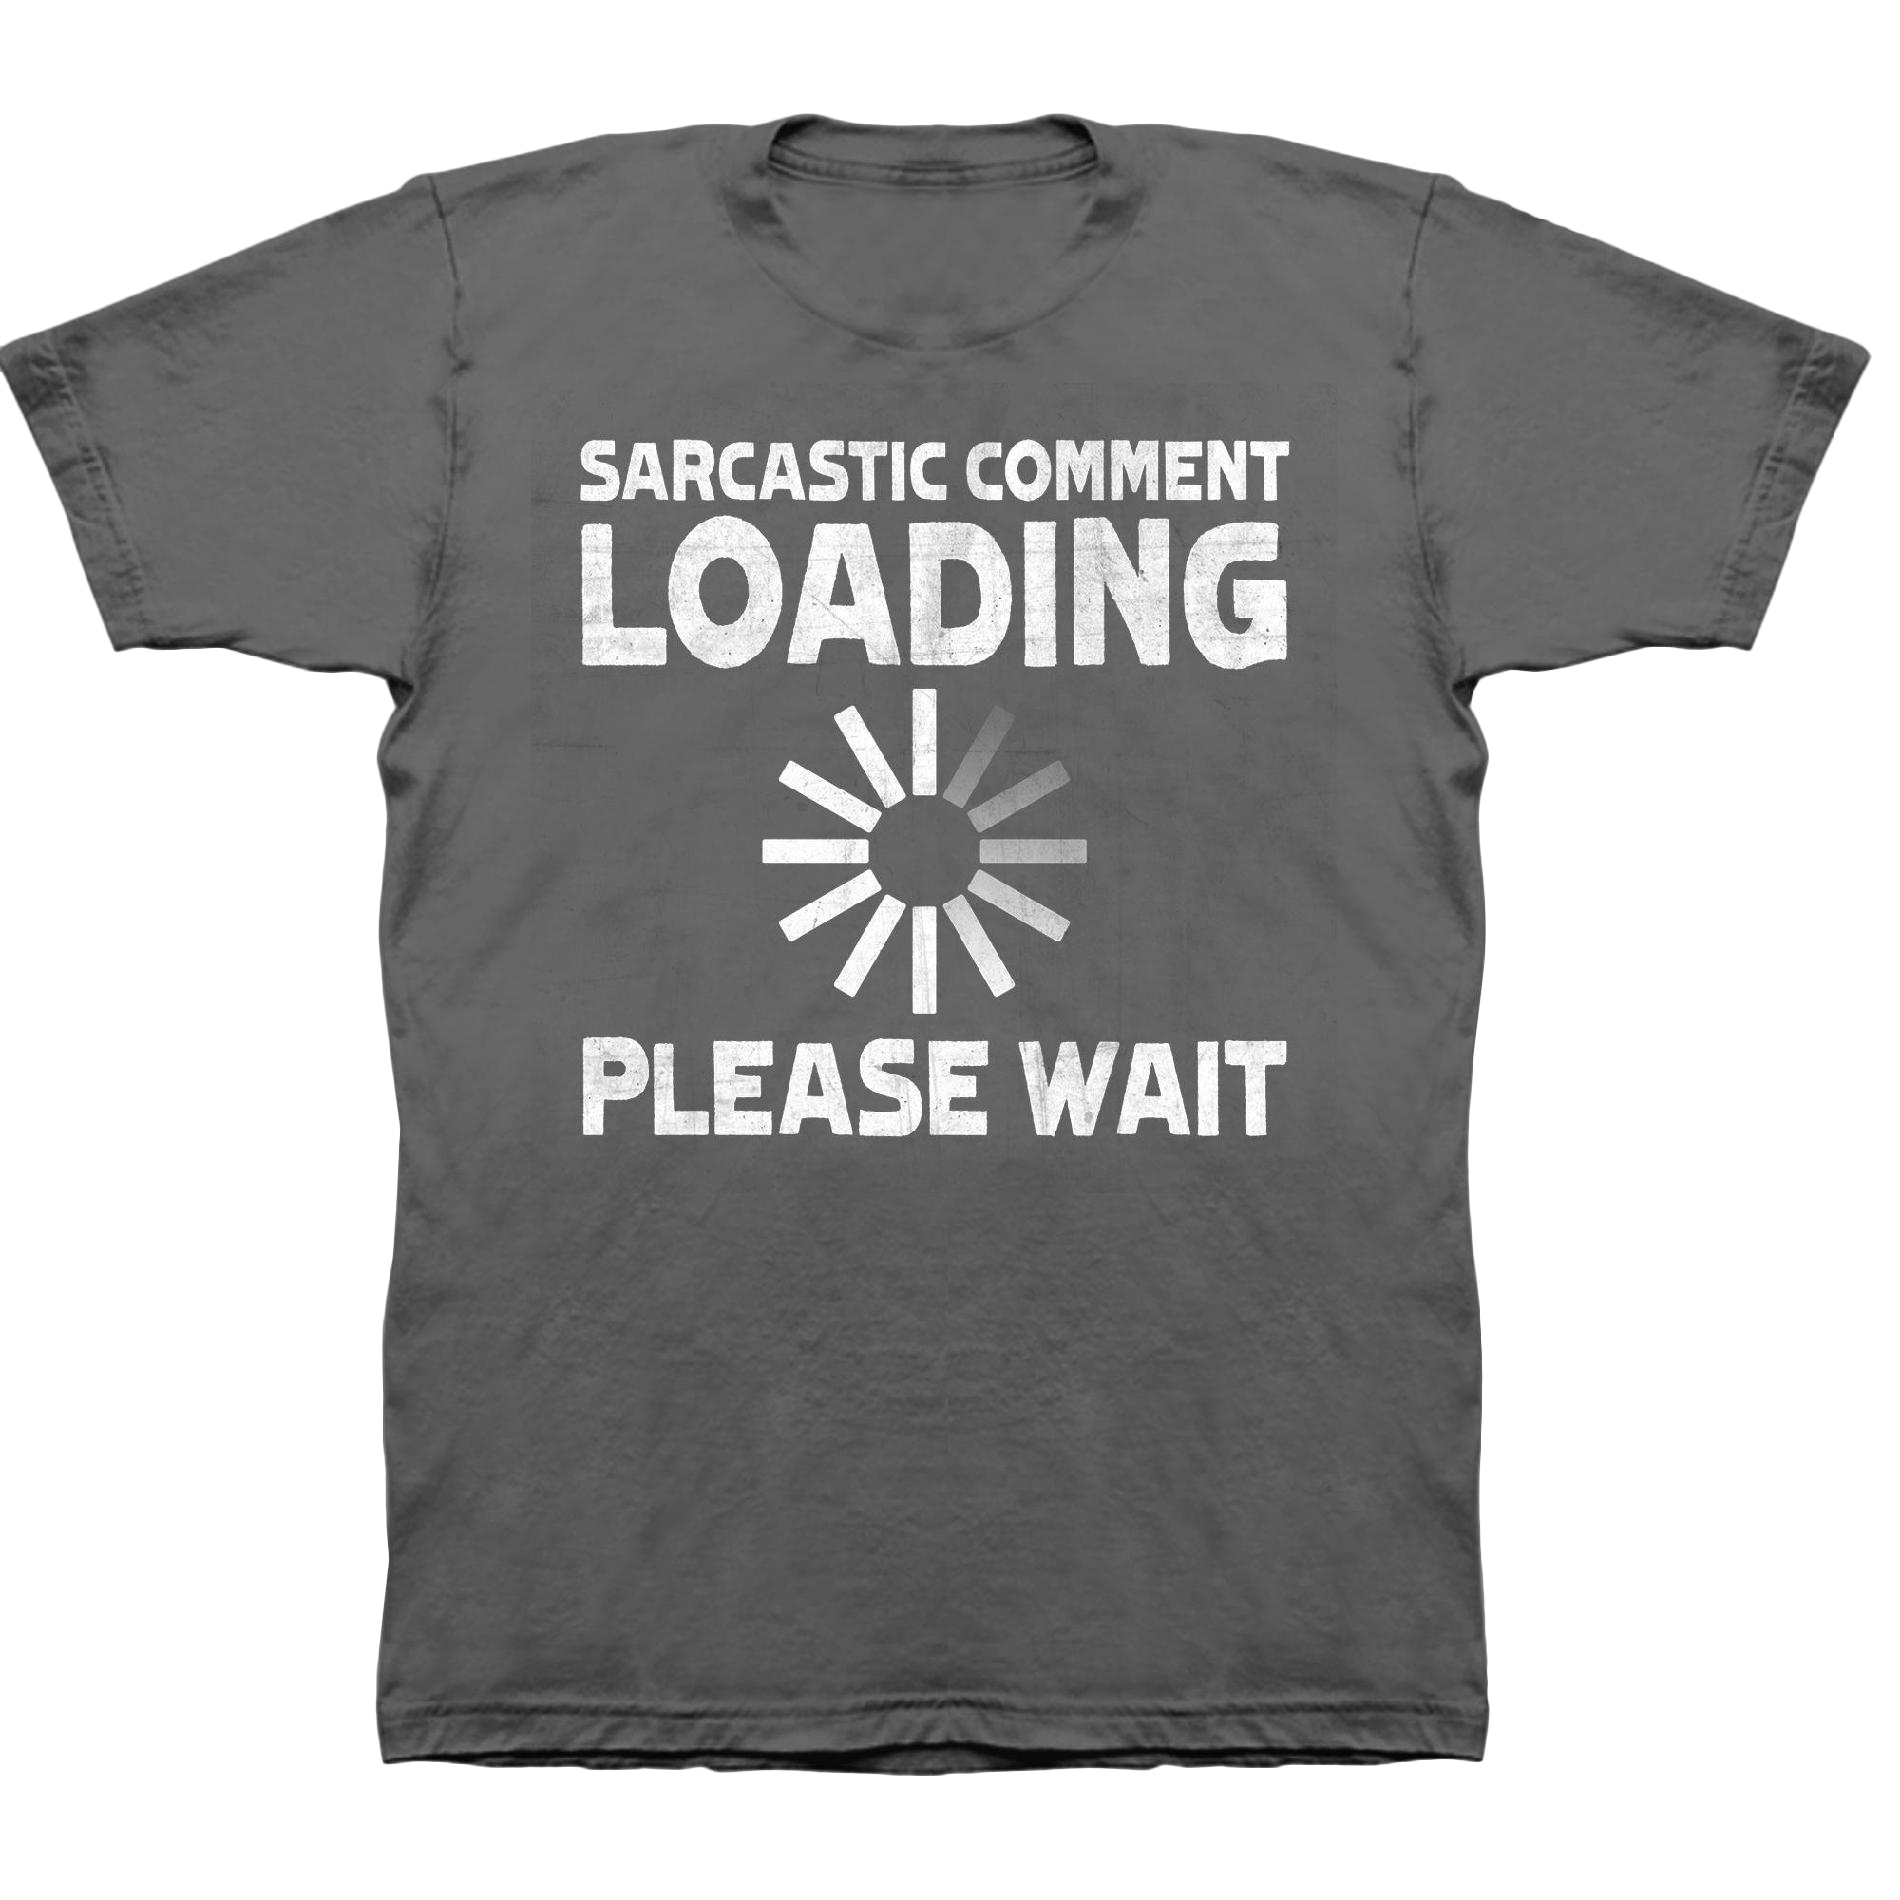 Mens Big & Tall Graphic T Shirt   Sarcastic Comment   Clothing, Shoes